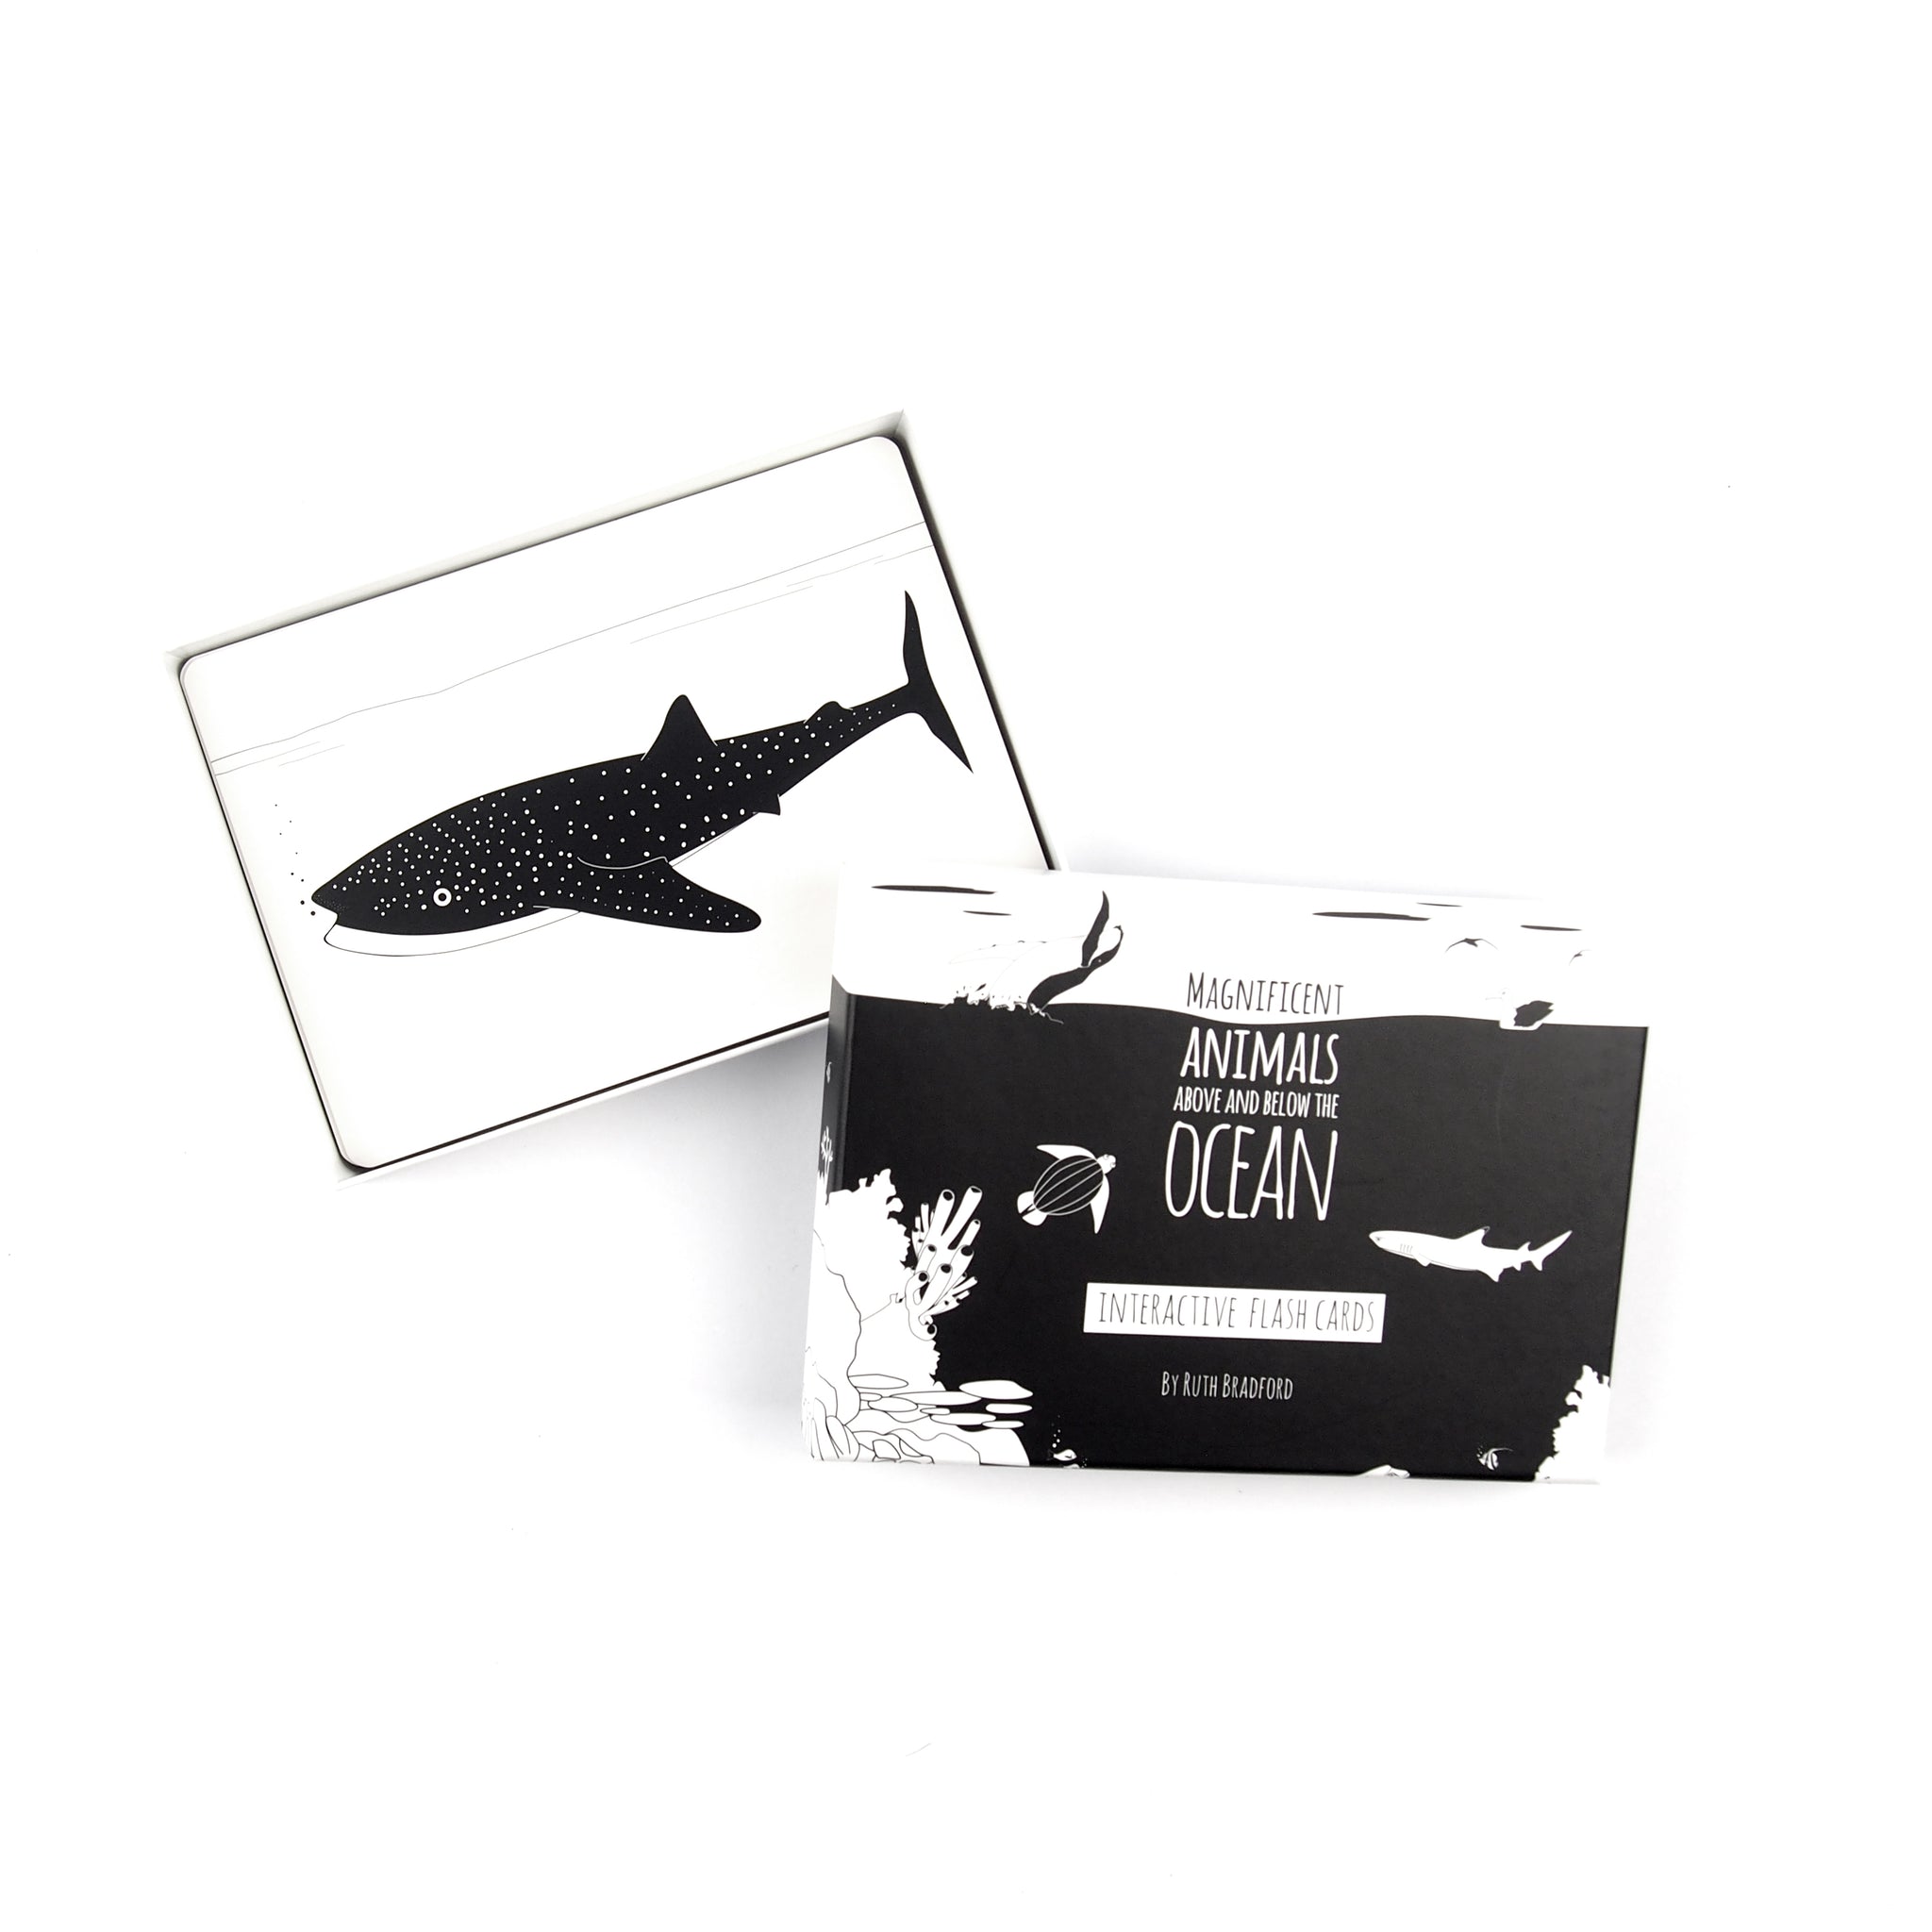 Flash Cards - Magnificent Animals from Above and Below the Oceans